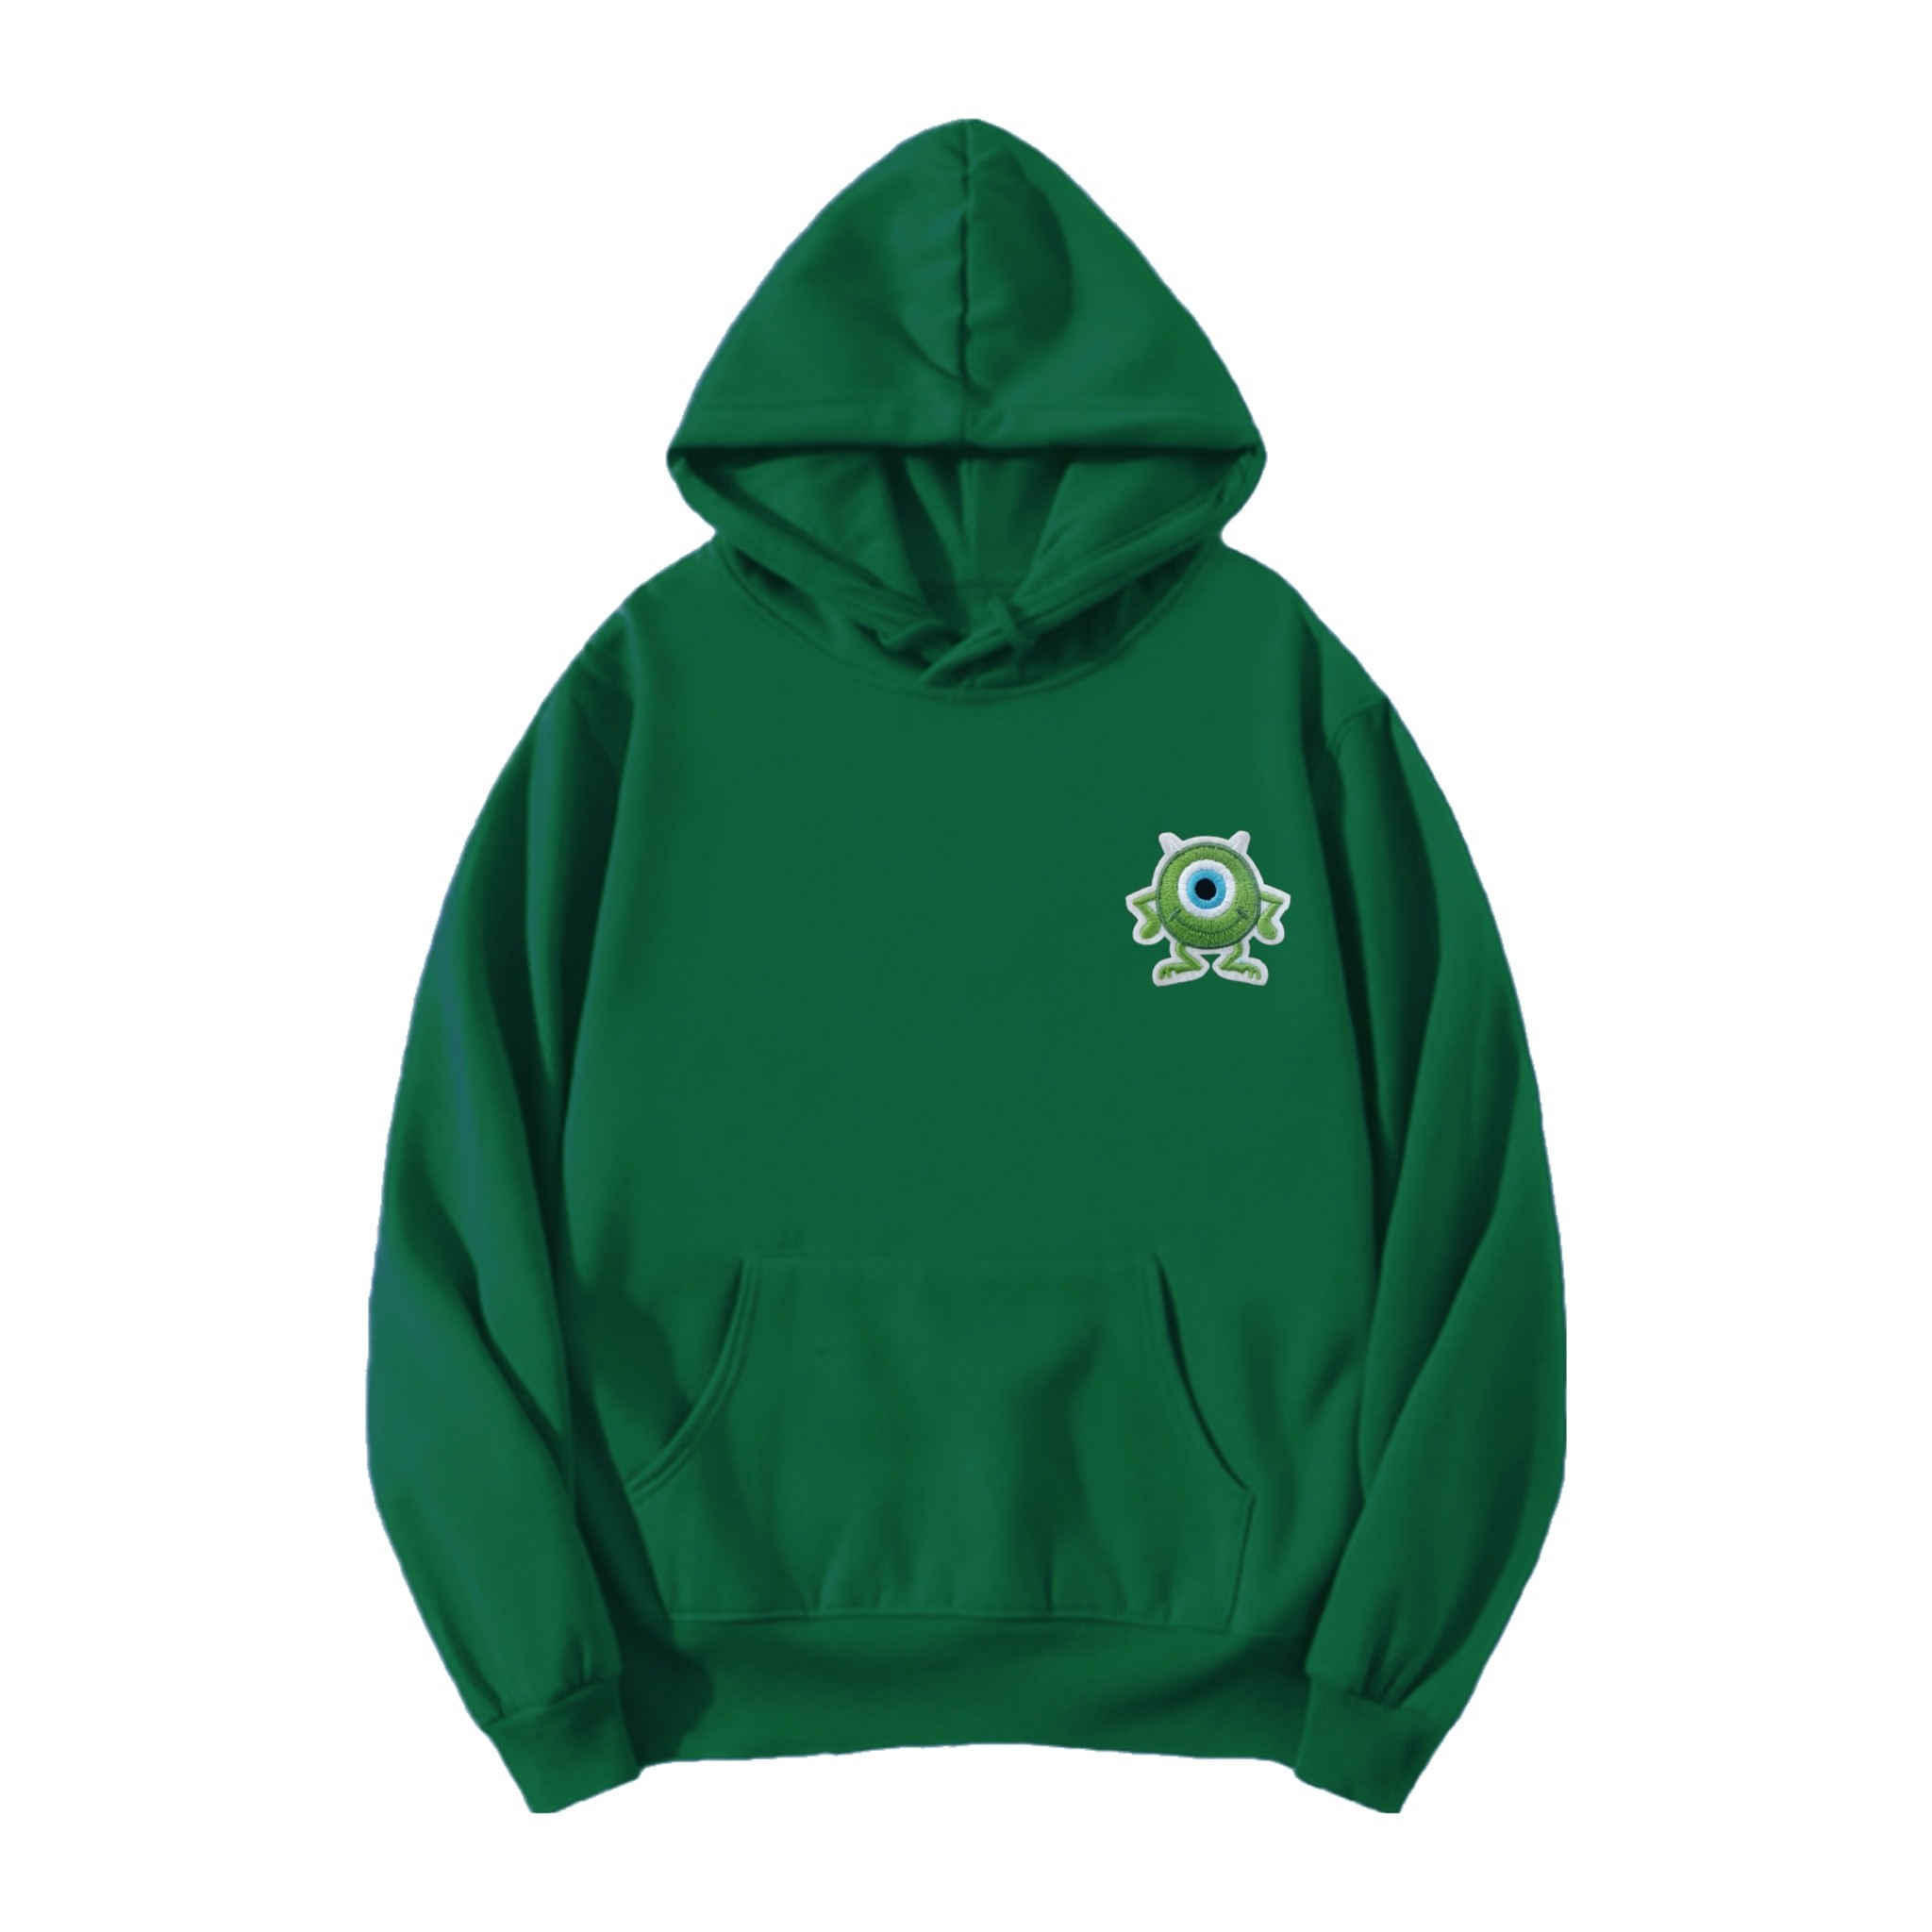 MIKE patched regular fit dark green hoodie 